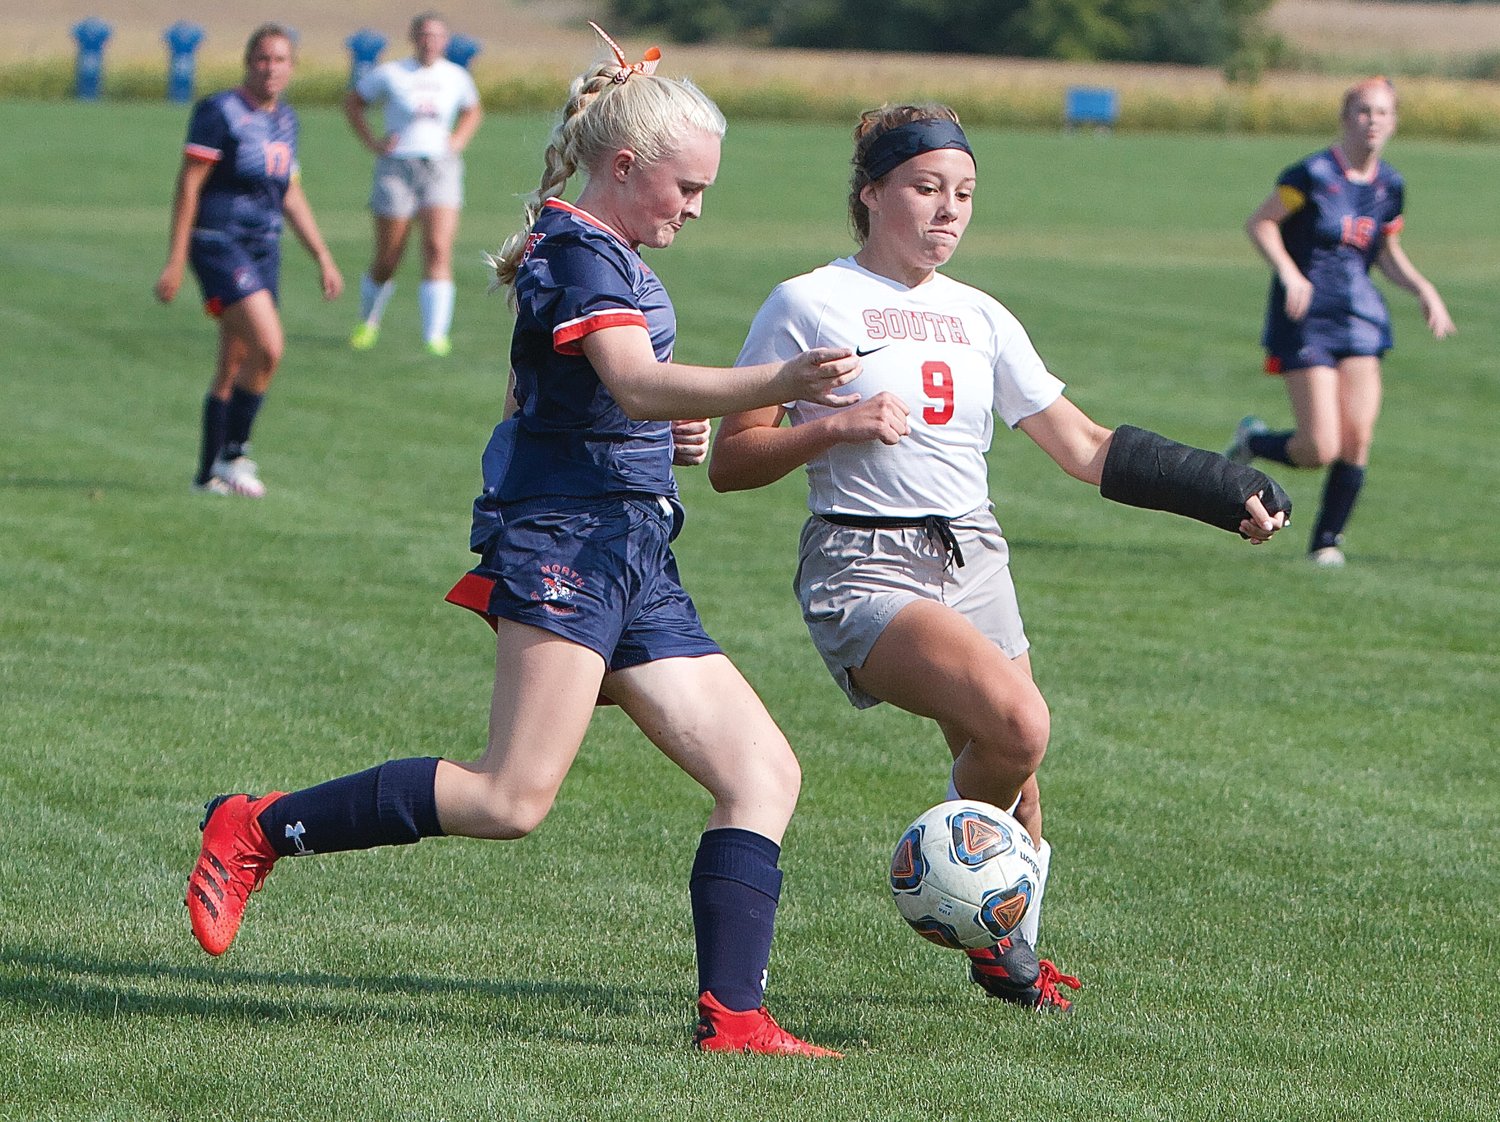 Southmont's Lillie Odum looks to work past a Charger.